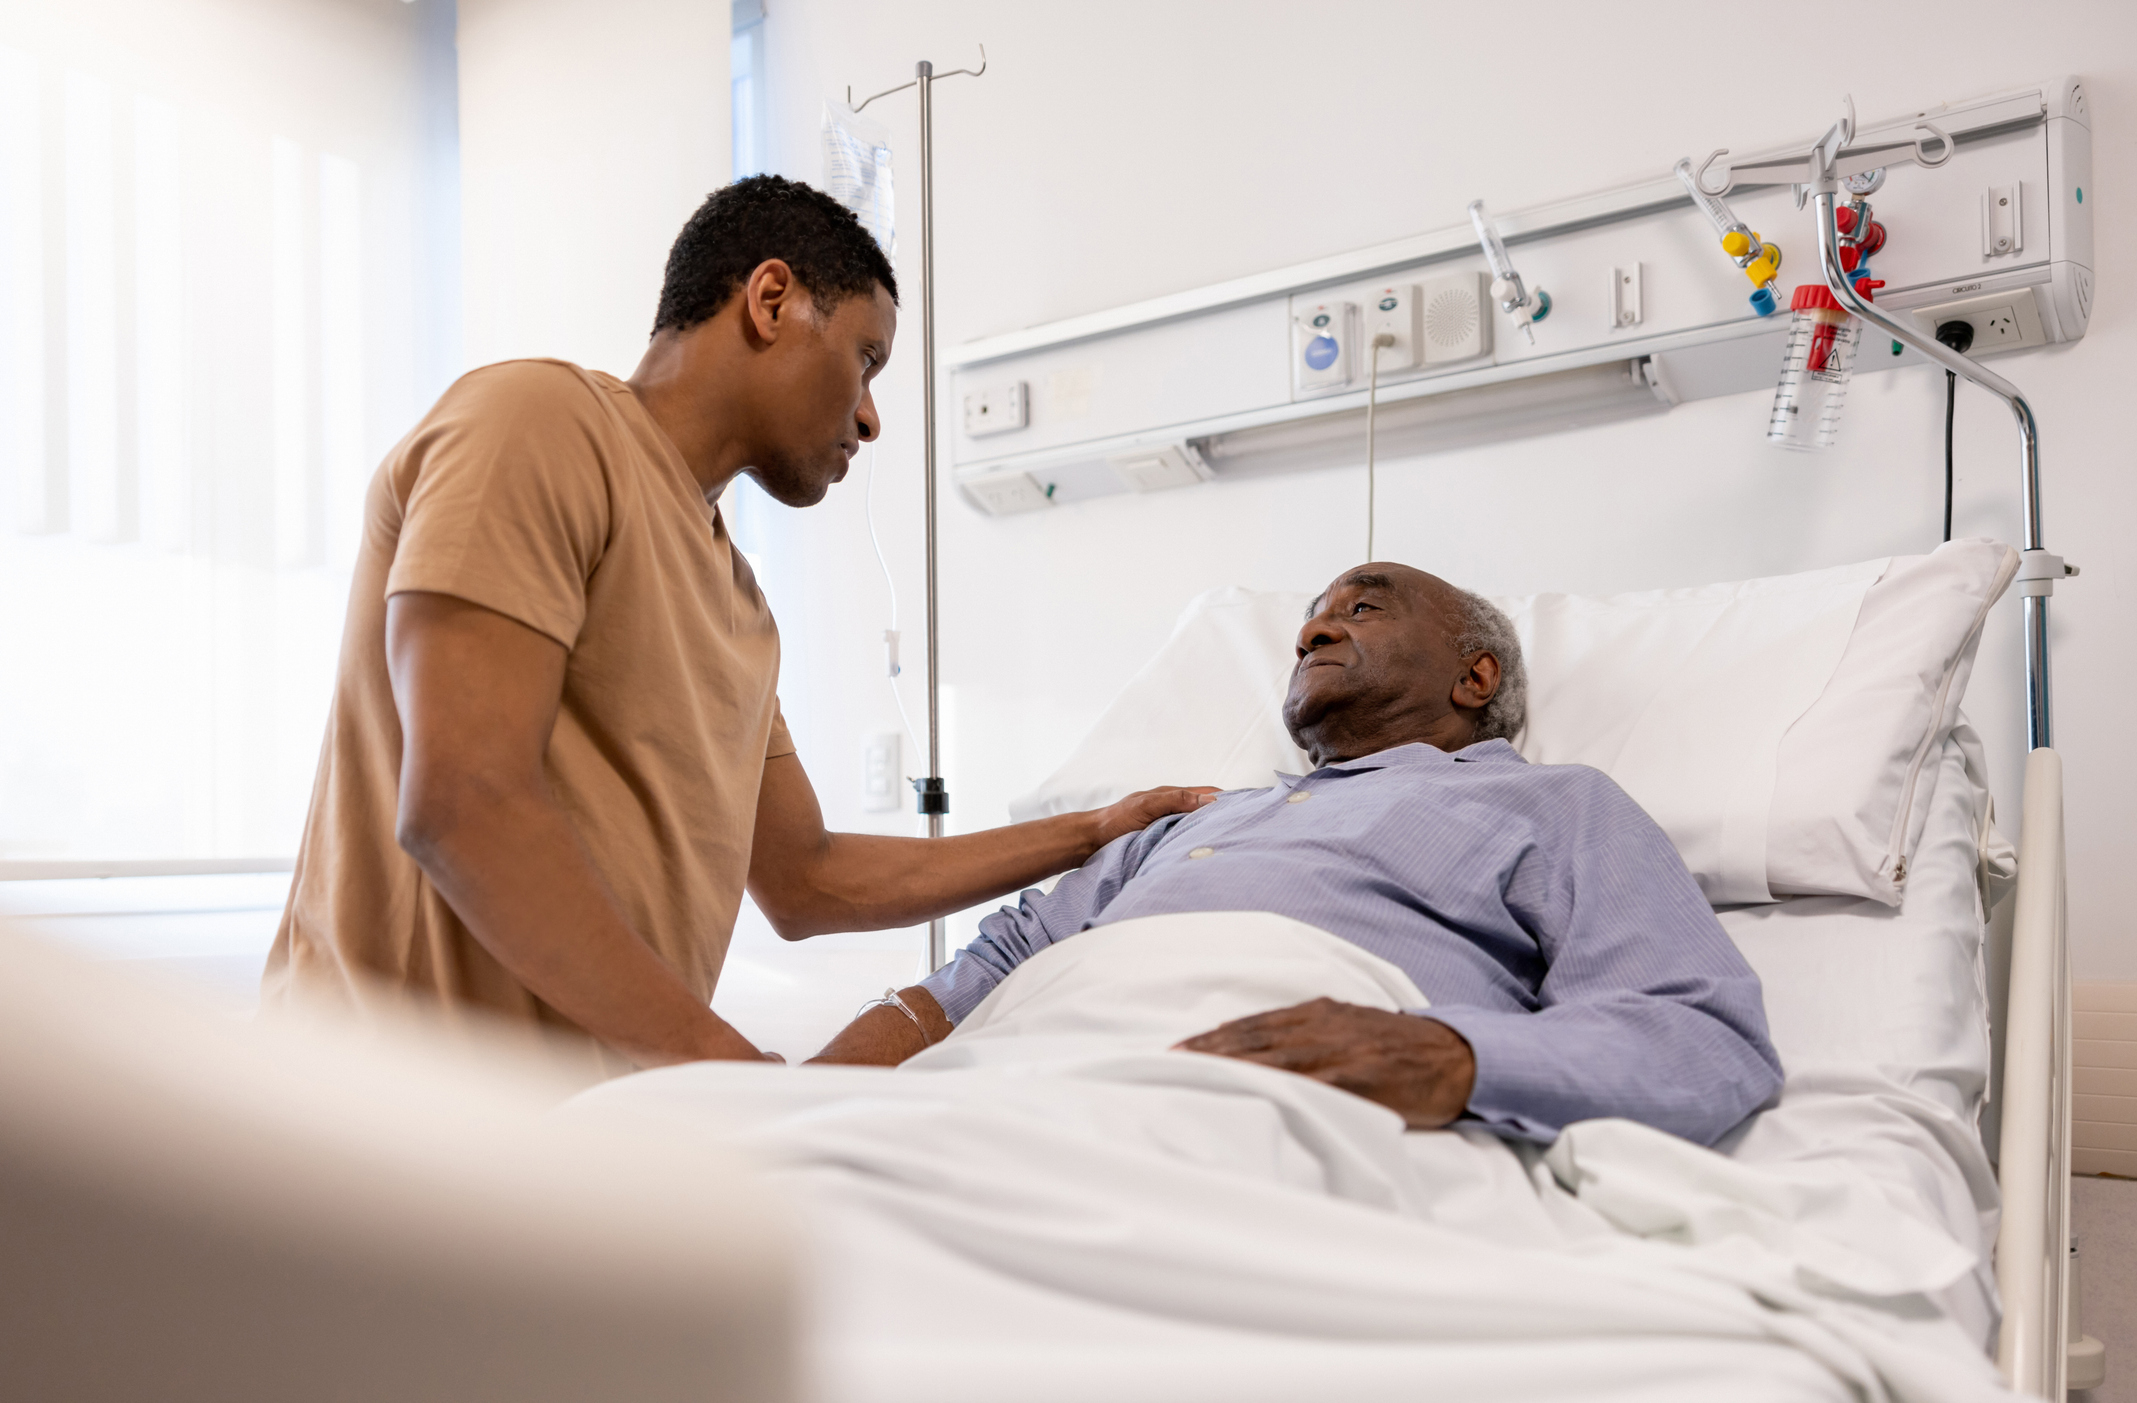 A younger person comforting an older person lying in a hospital bed